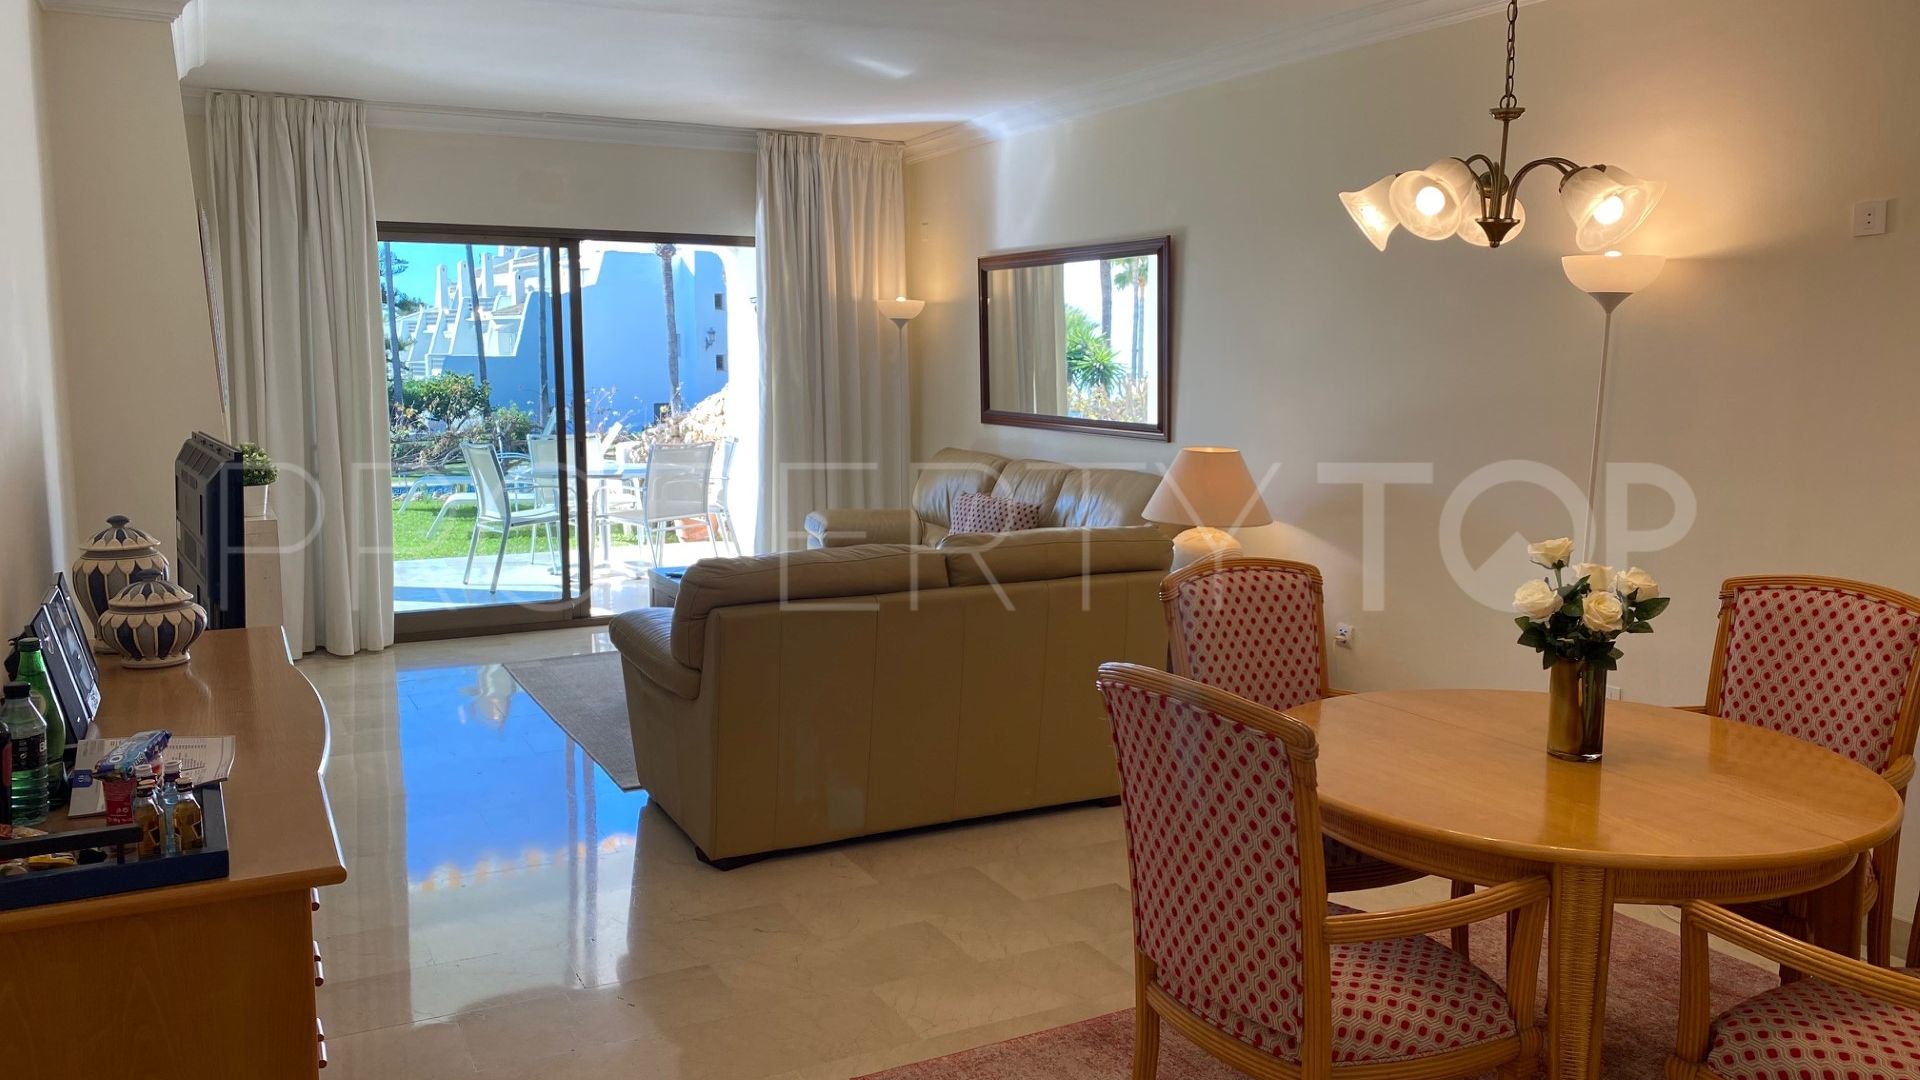 2 bedrooms ground floor apartment for sale in Coral Beach